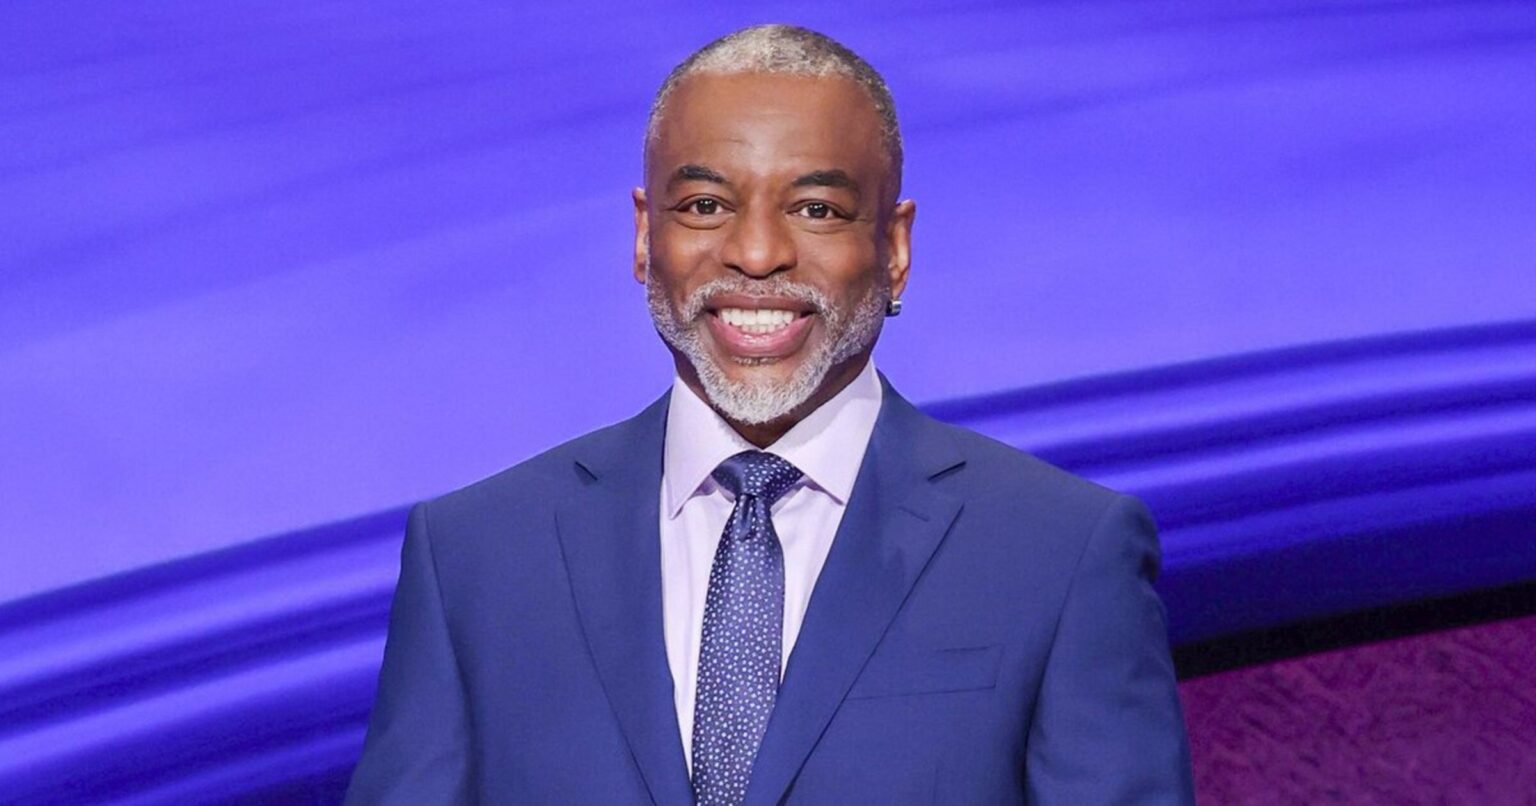 All rounds of 'Jeopardy' on or off screen, needs a host! LeVar Burton appears to have most of the votes but will he replace Mike Riachards? Find out!